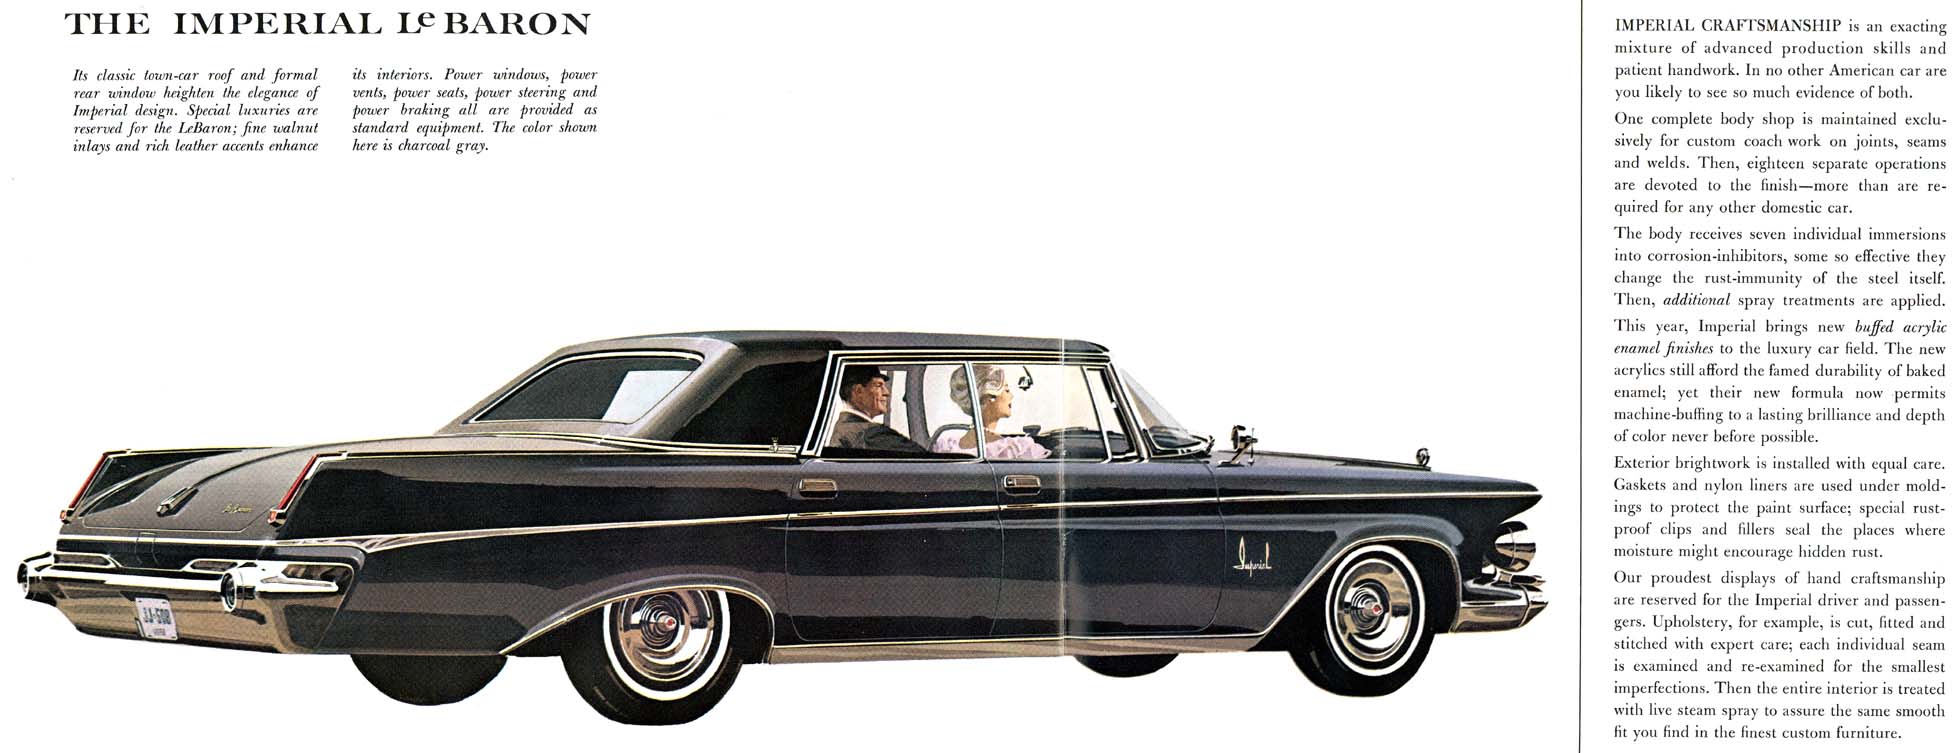 1963 Chrysler Imperial Brochure Page 5